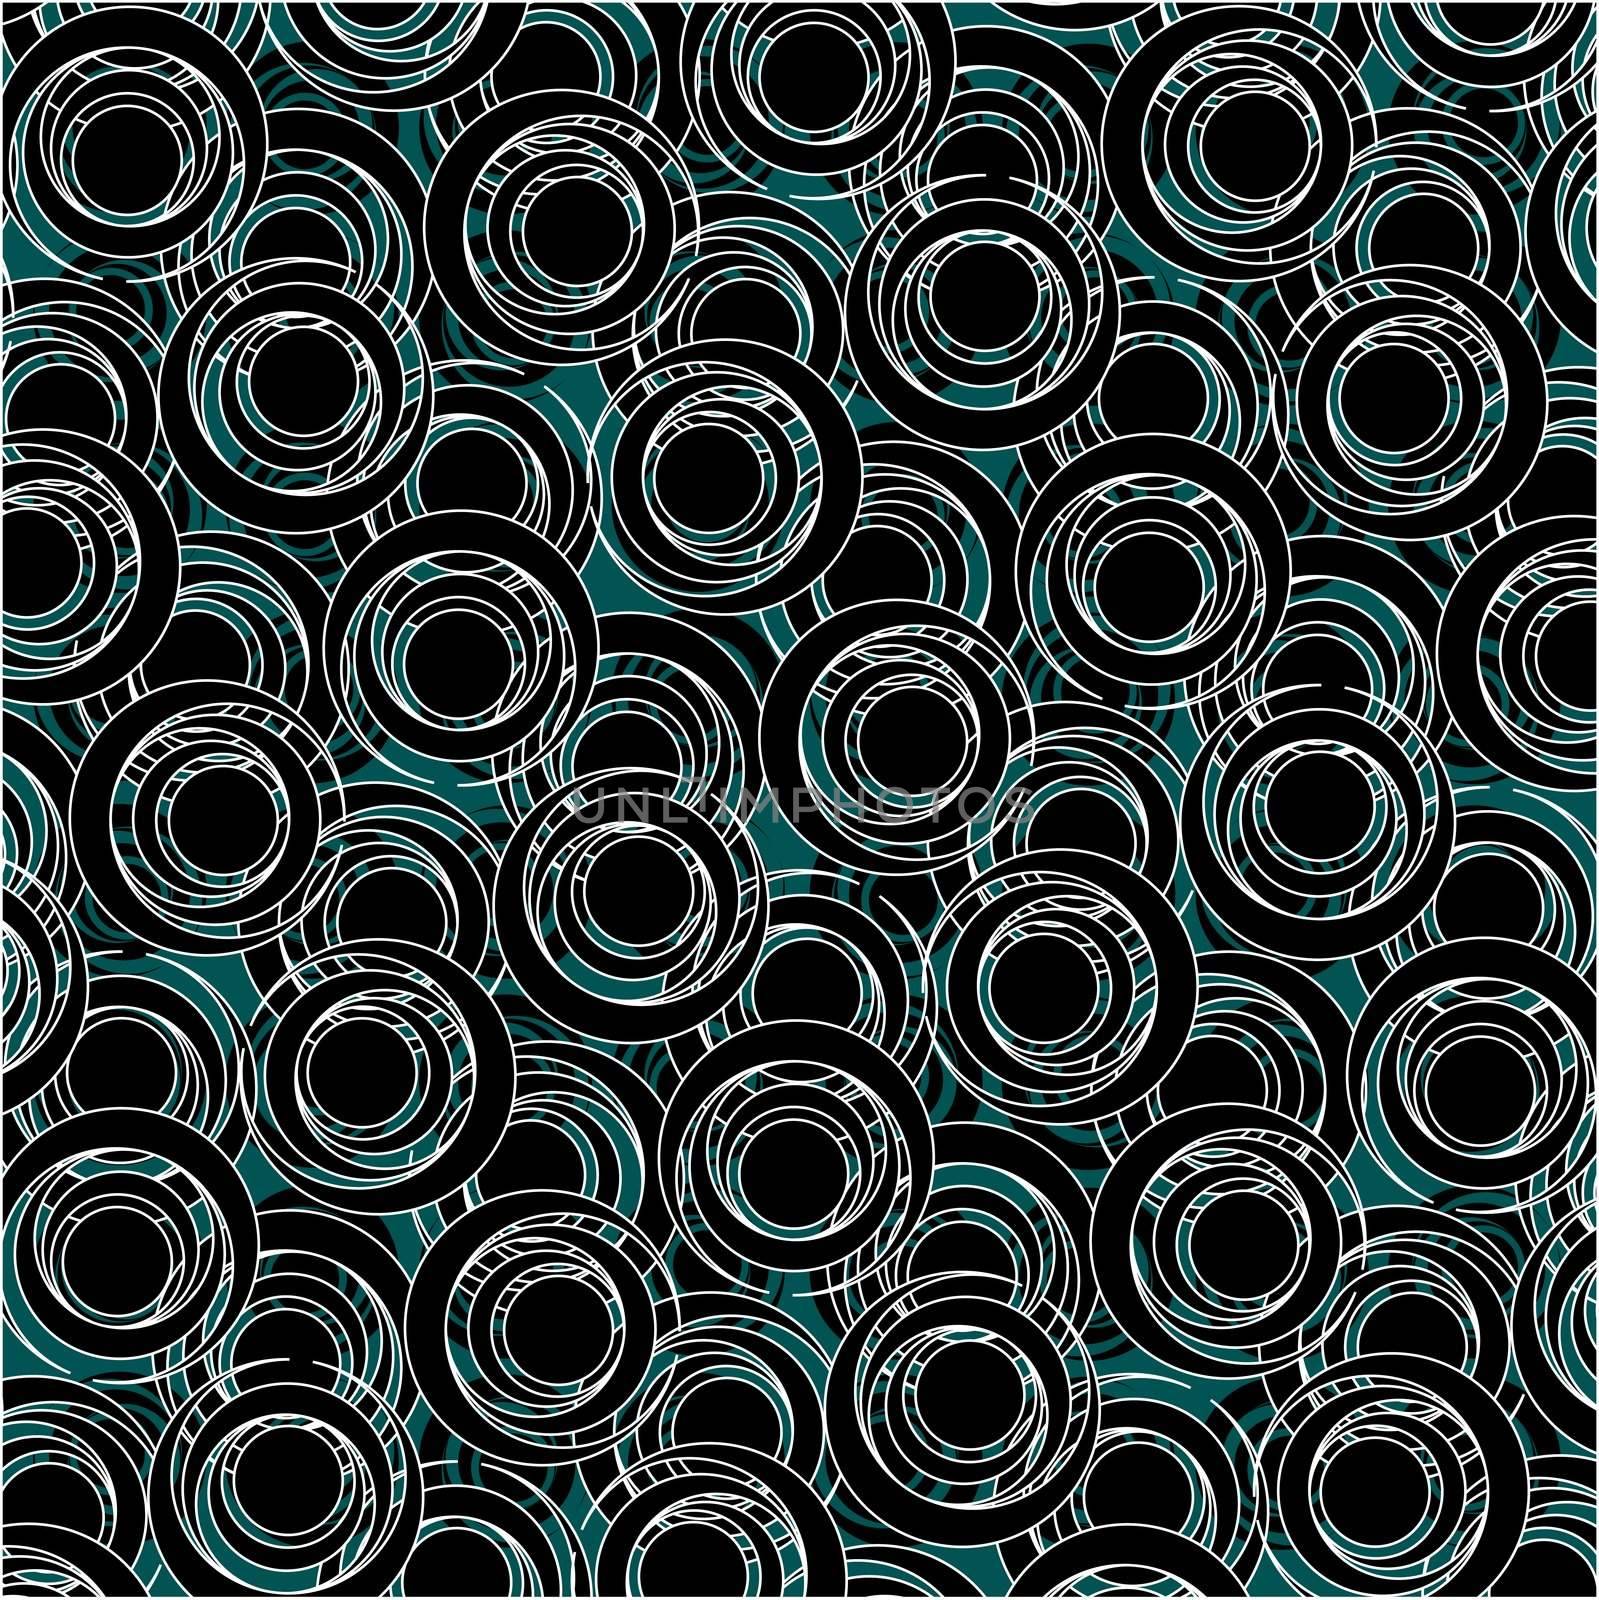 abstract circle pattern, vector art illustration; more textures and drawings in my gallery